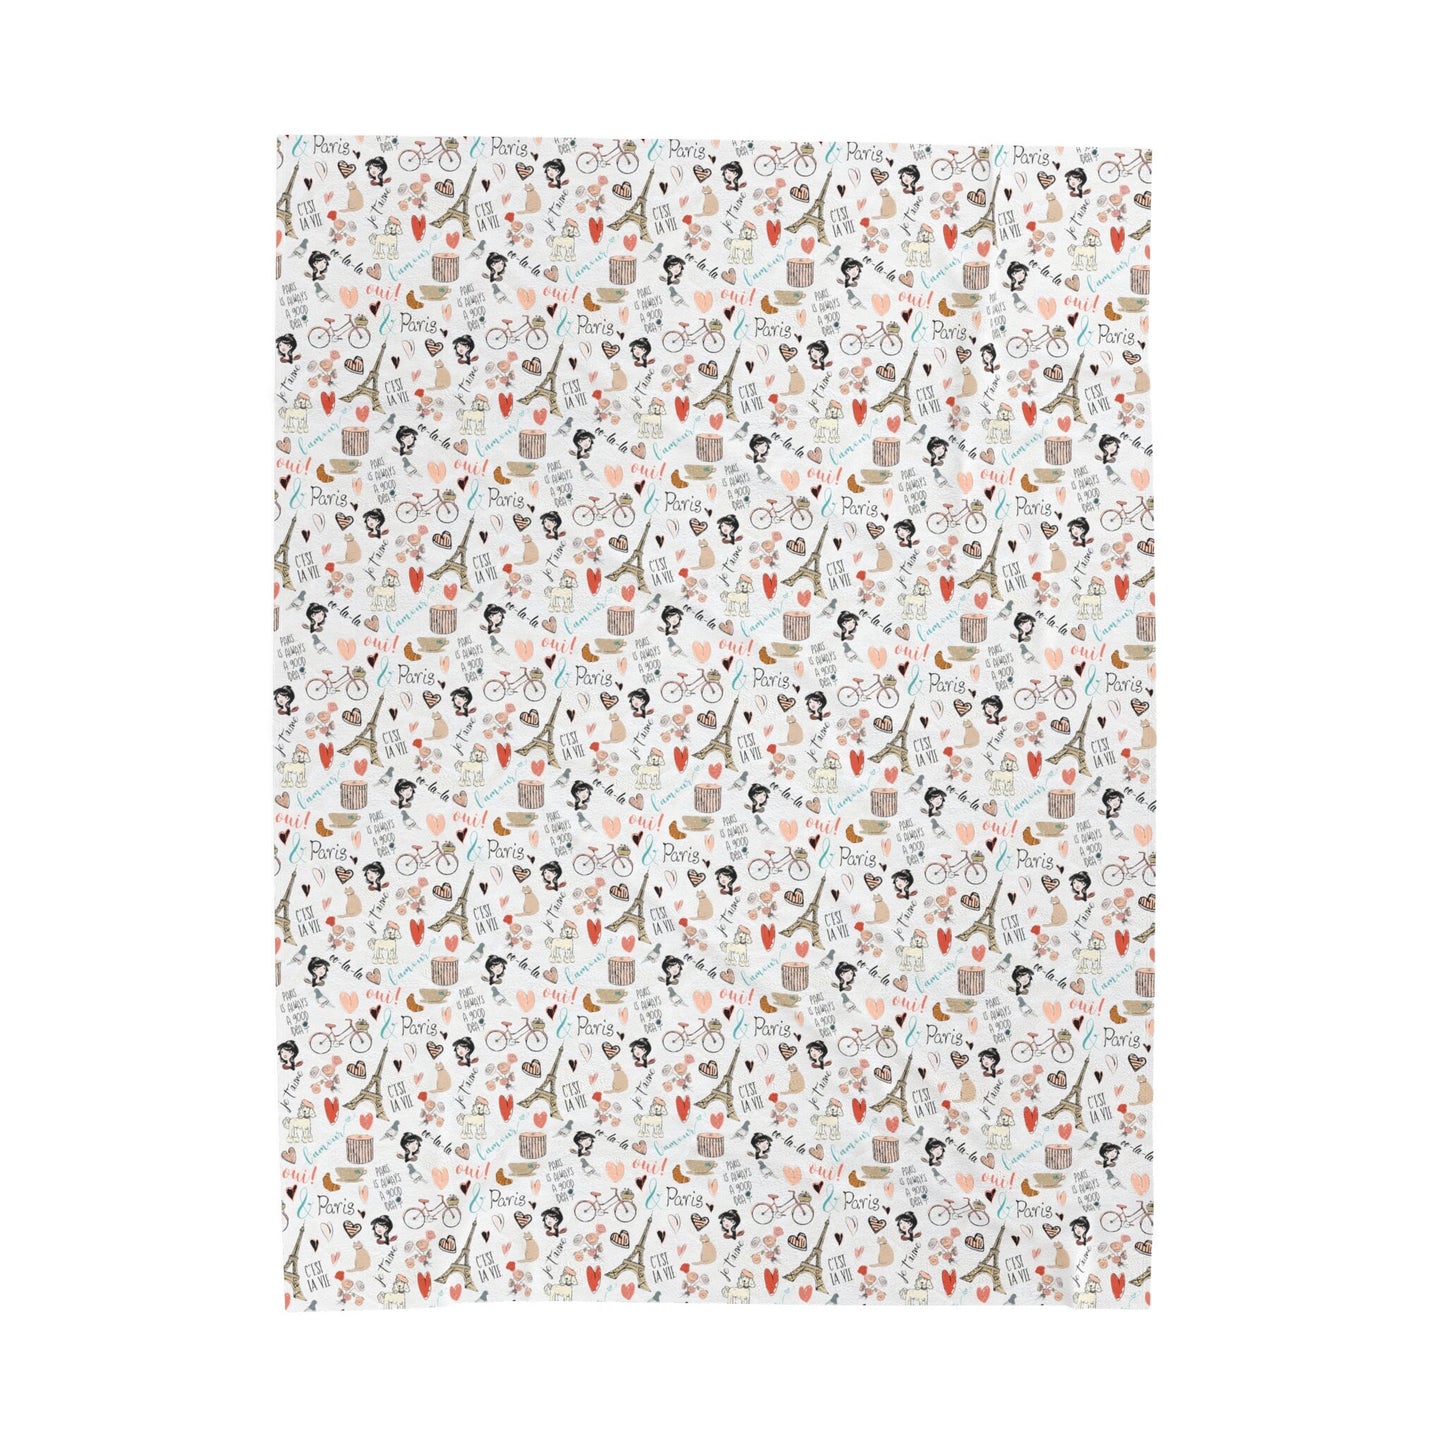 a sheet of paper with a pattern of animals on it